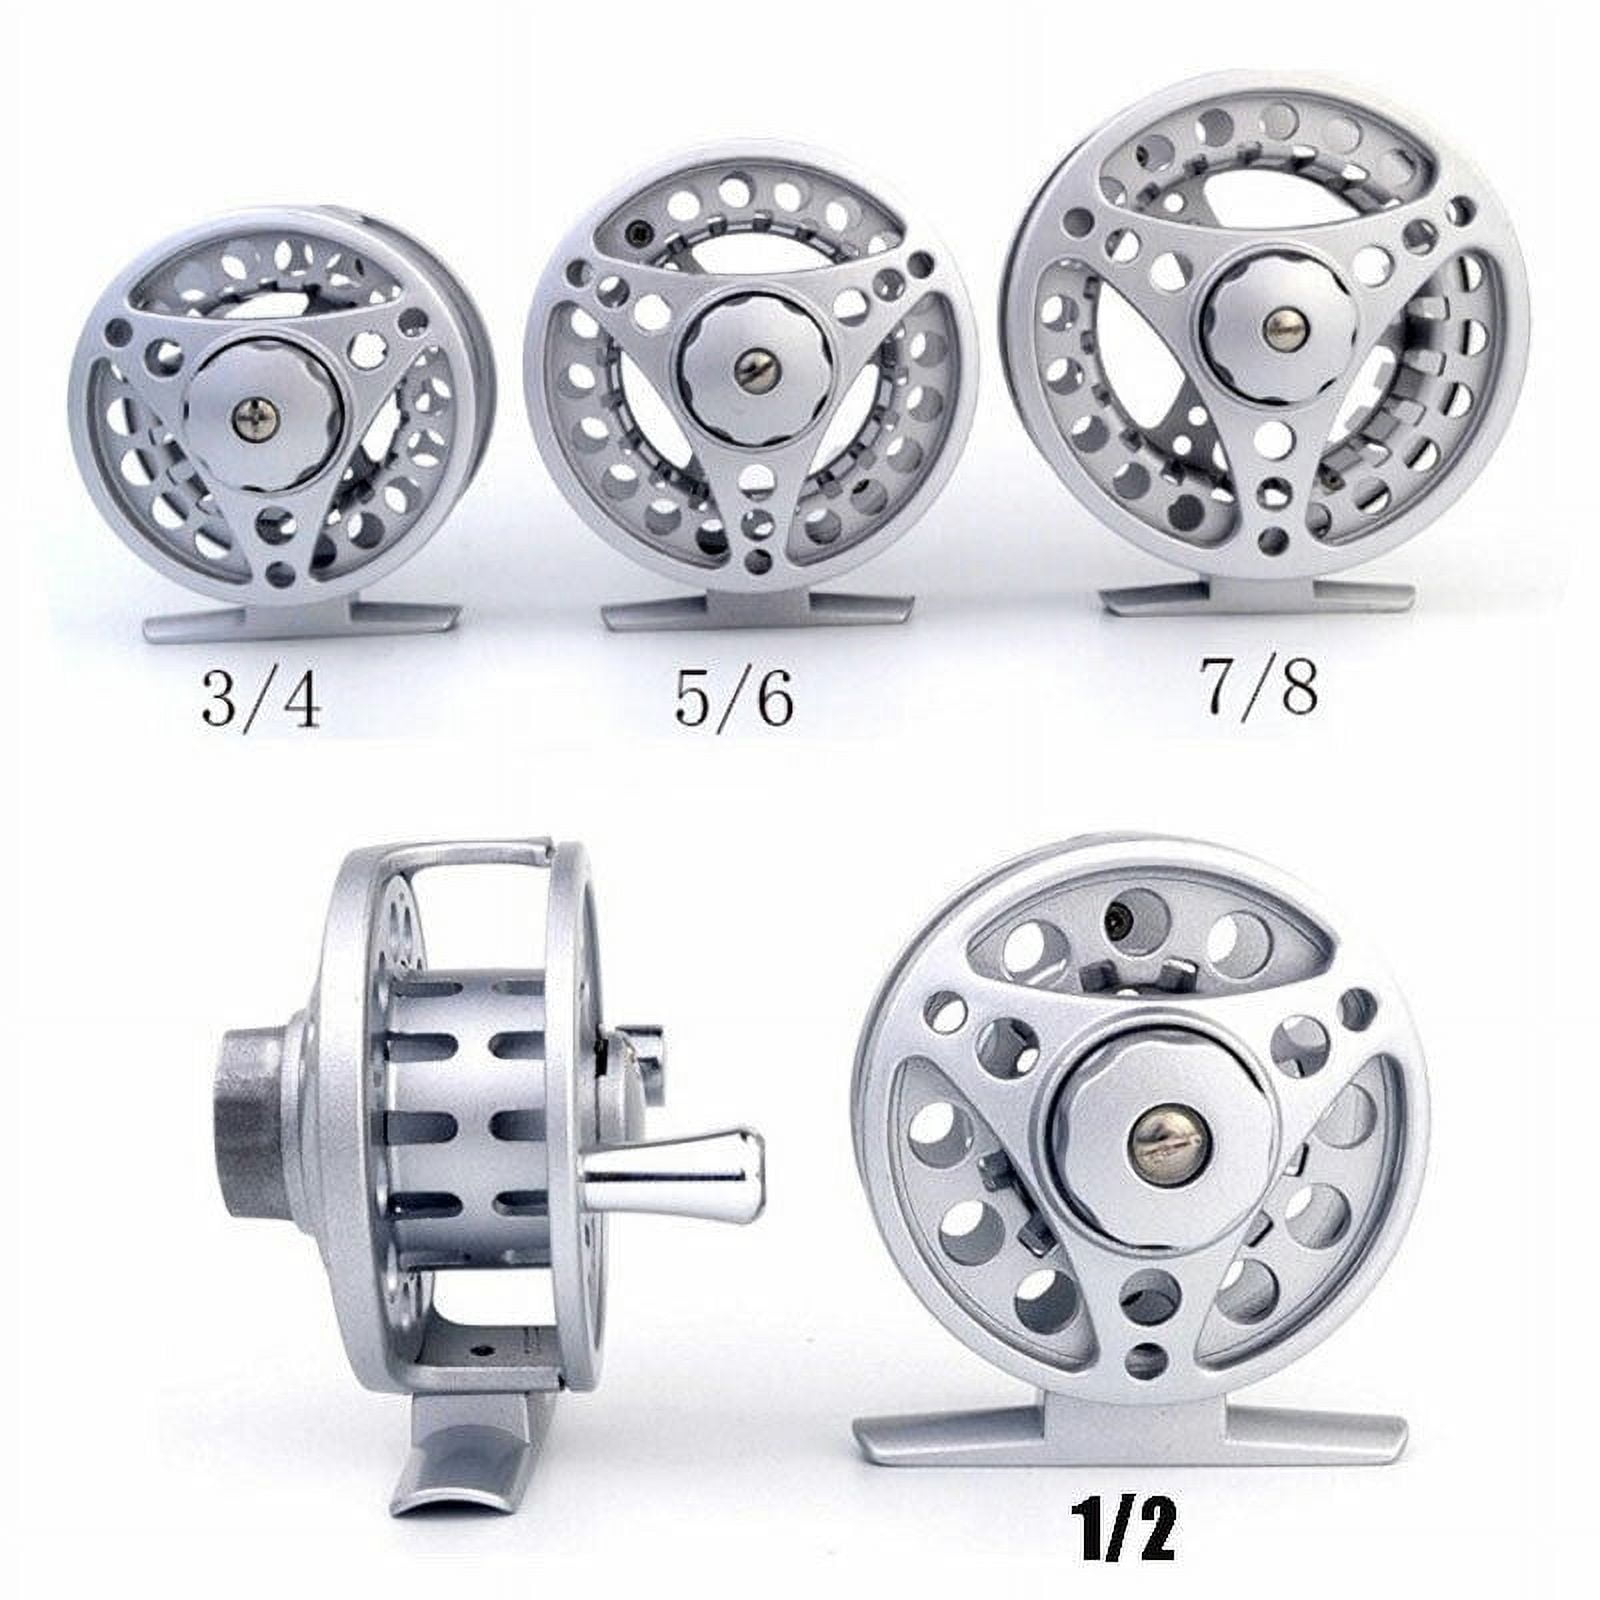 Fly Reel 1/2/3/4/5/6/7/8 WT Large Arbor Silver Aluminum Fly